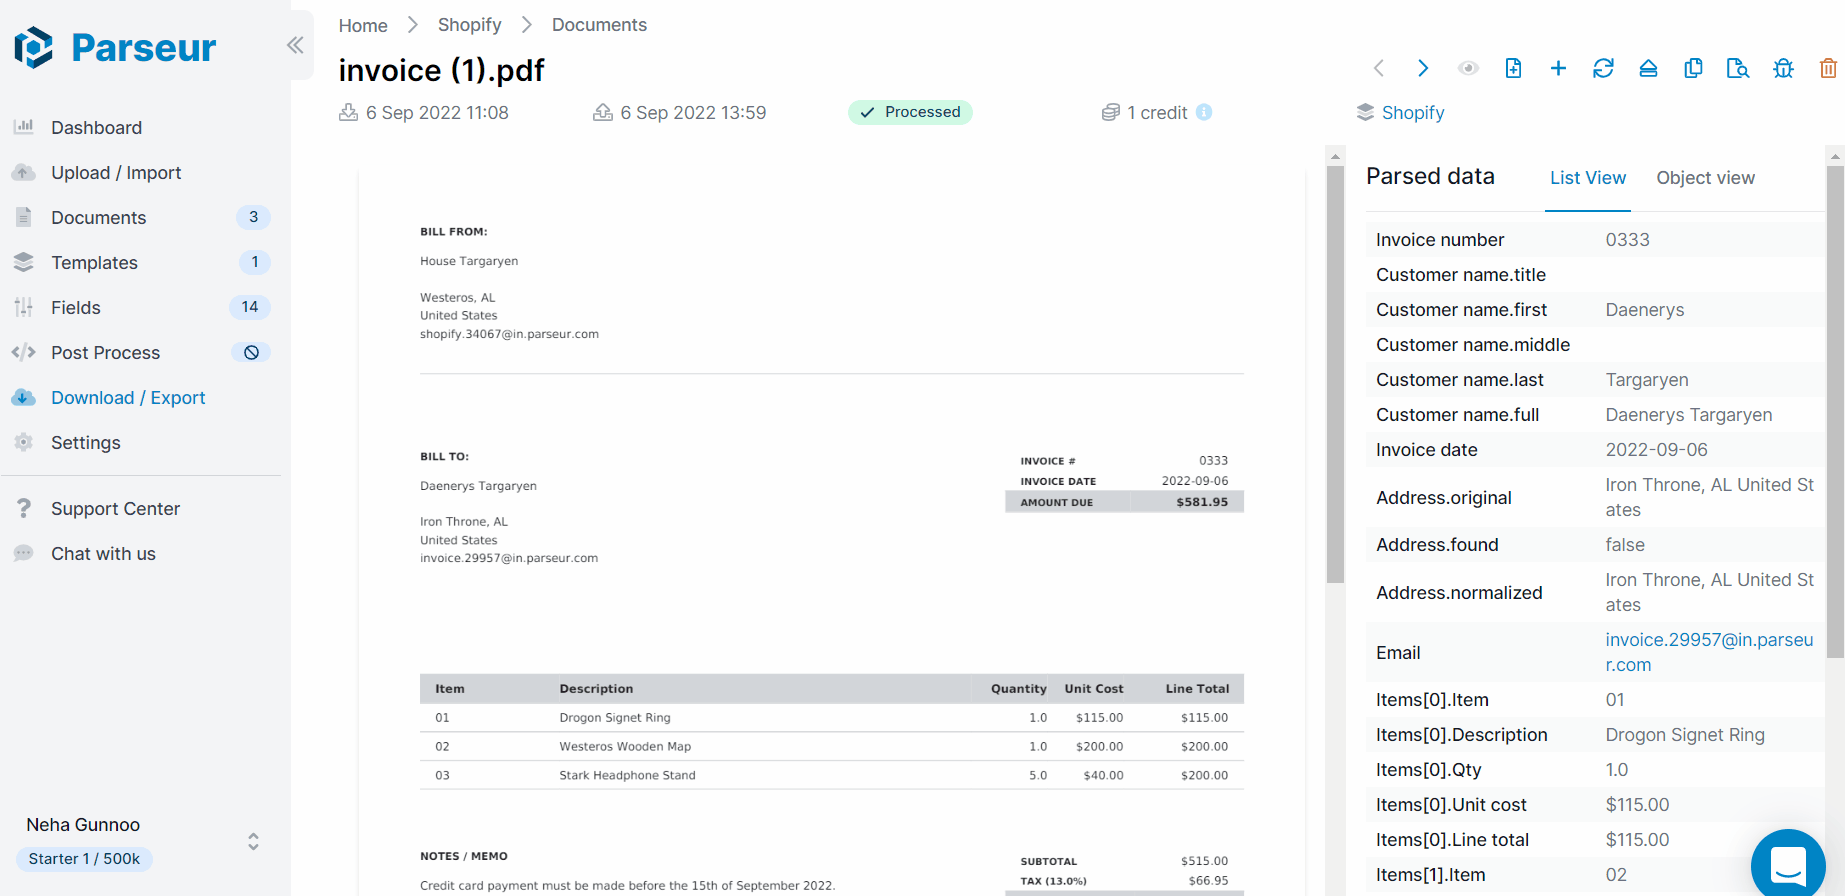 Extracted data from Shopify invoice